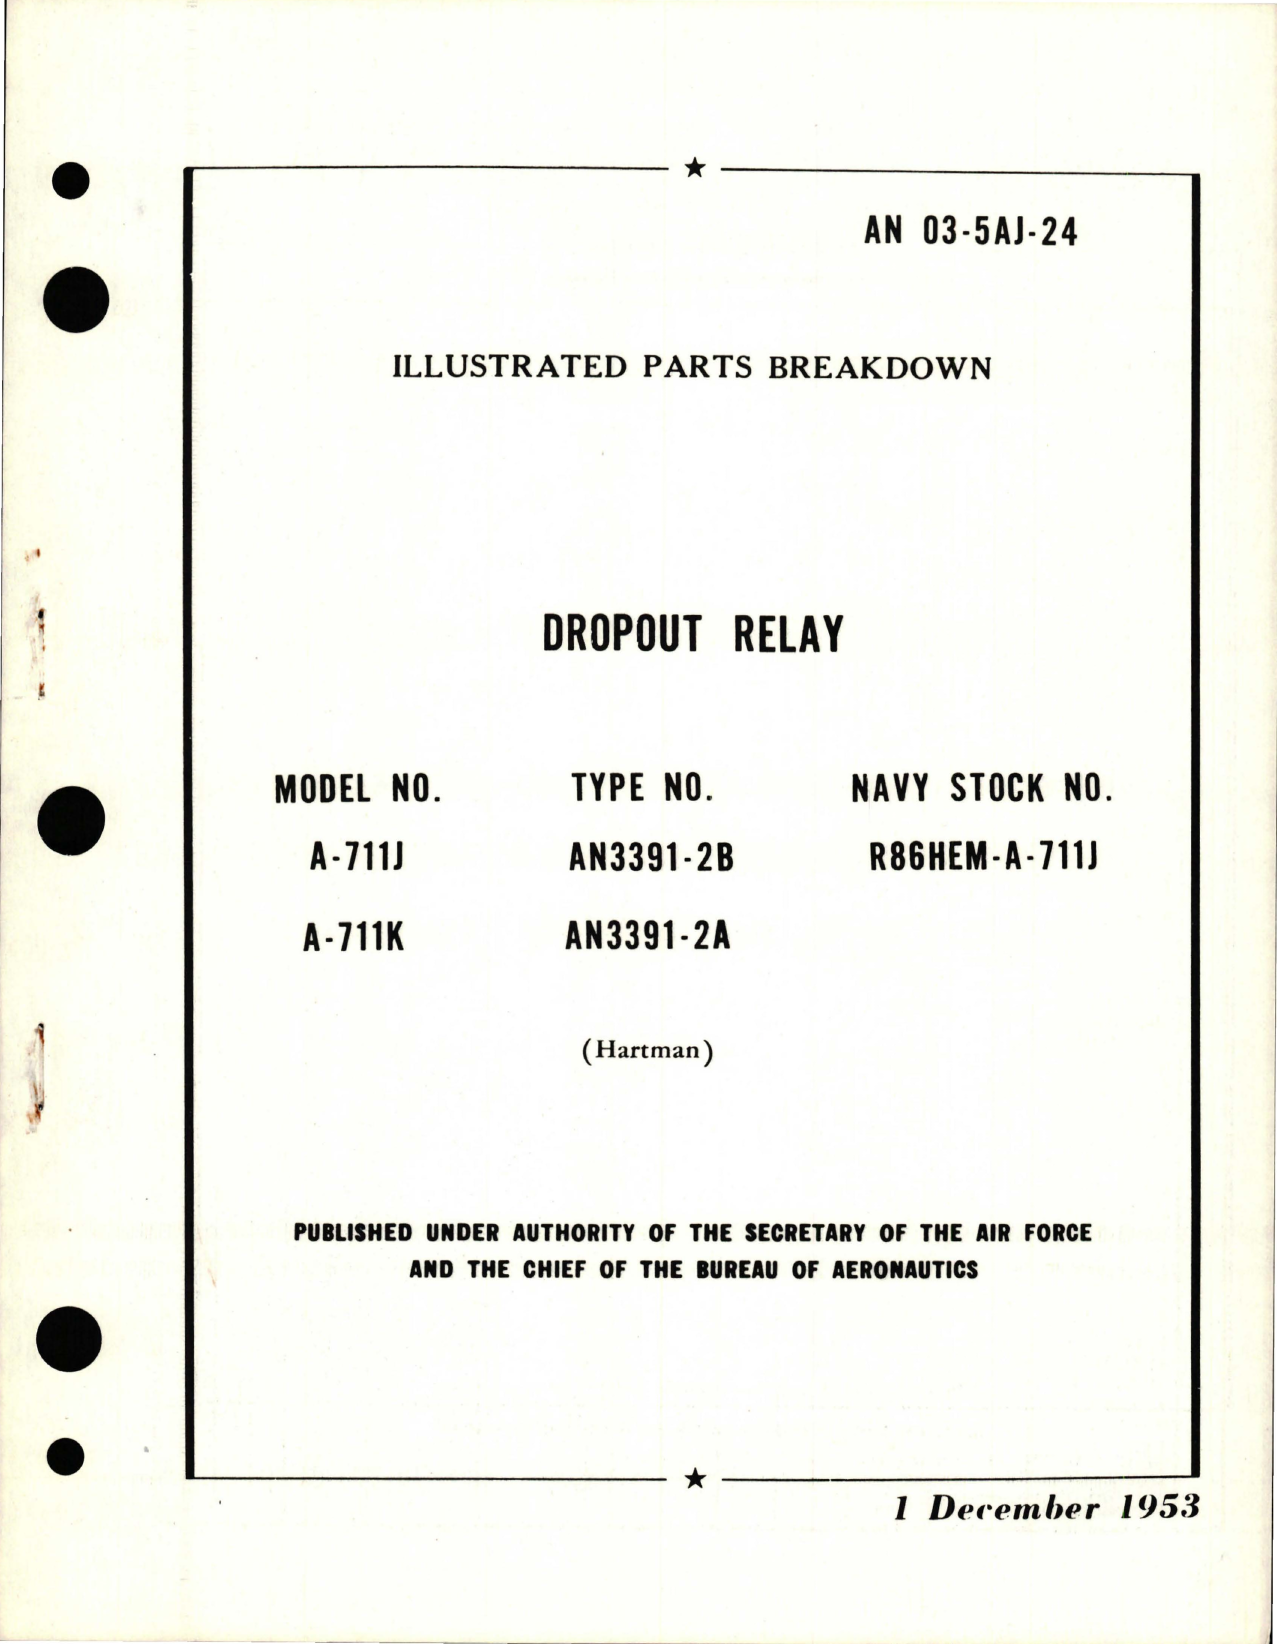 Sample page 1 from AirCorps Library document: Illustrated Parts Breakdown for Dropout Relay - Model A-711J and A-711K